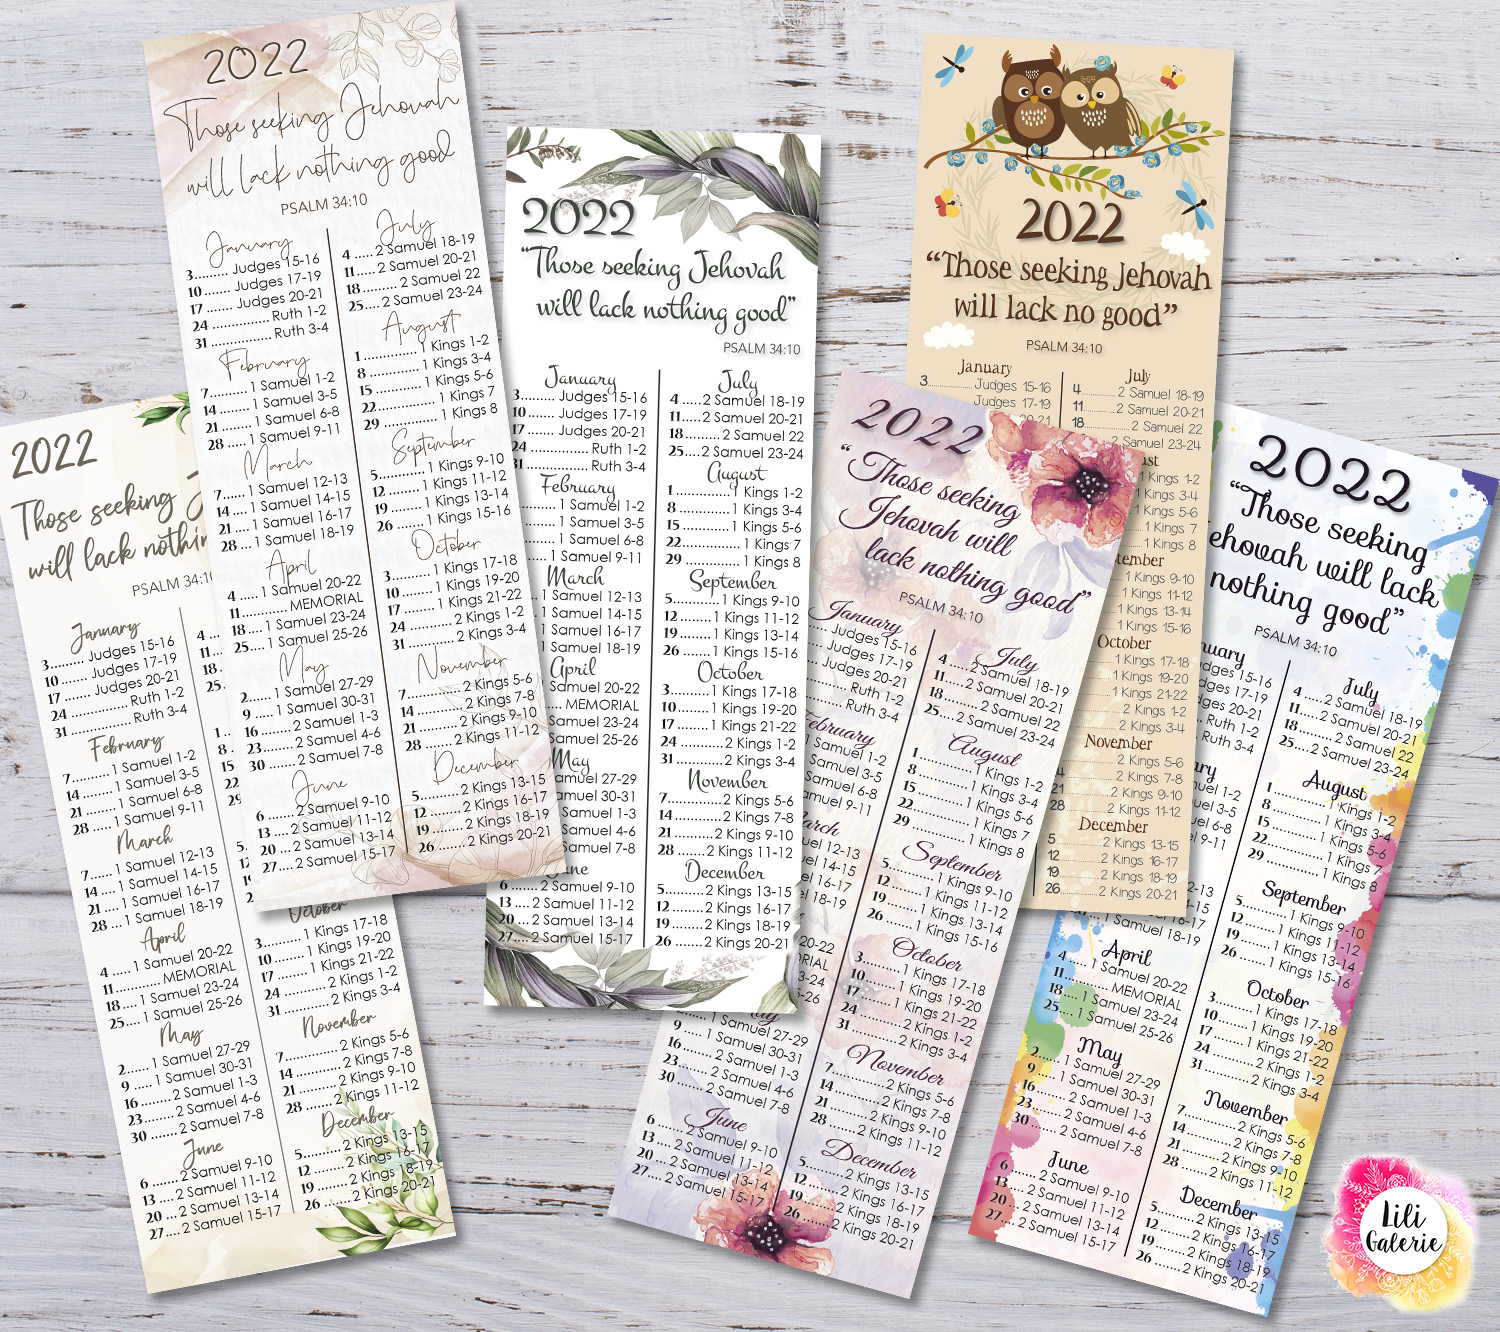 LiliGalerie-Bookmark-Bible Reading 2022